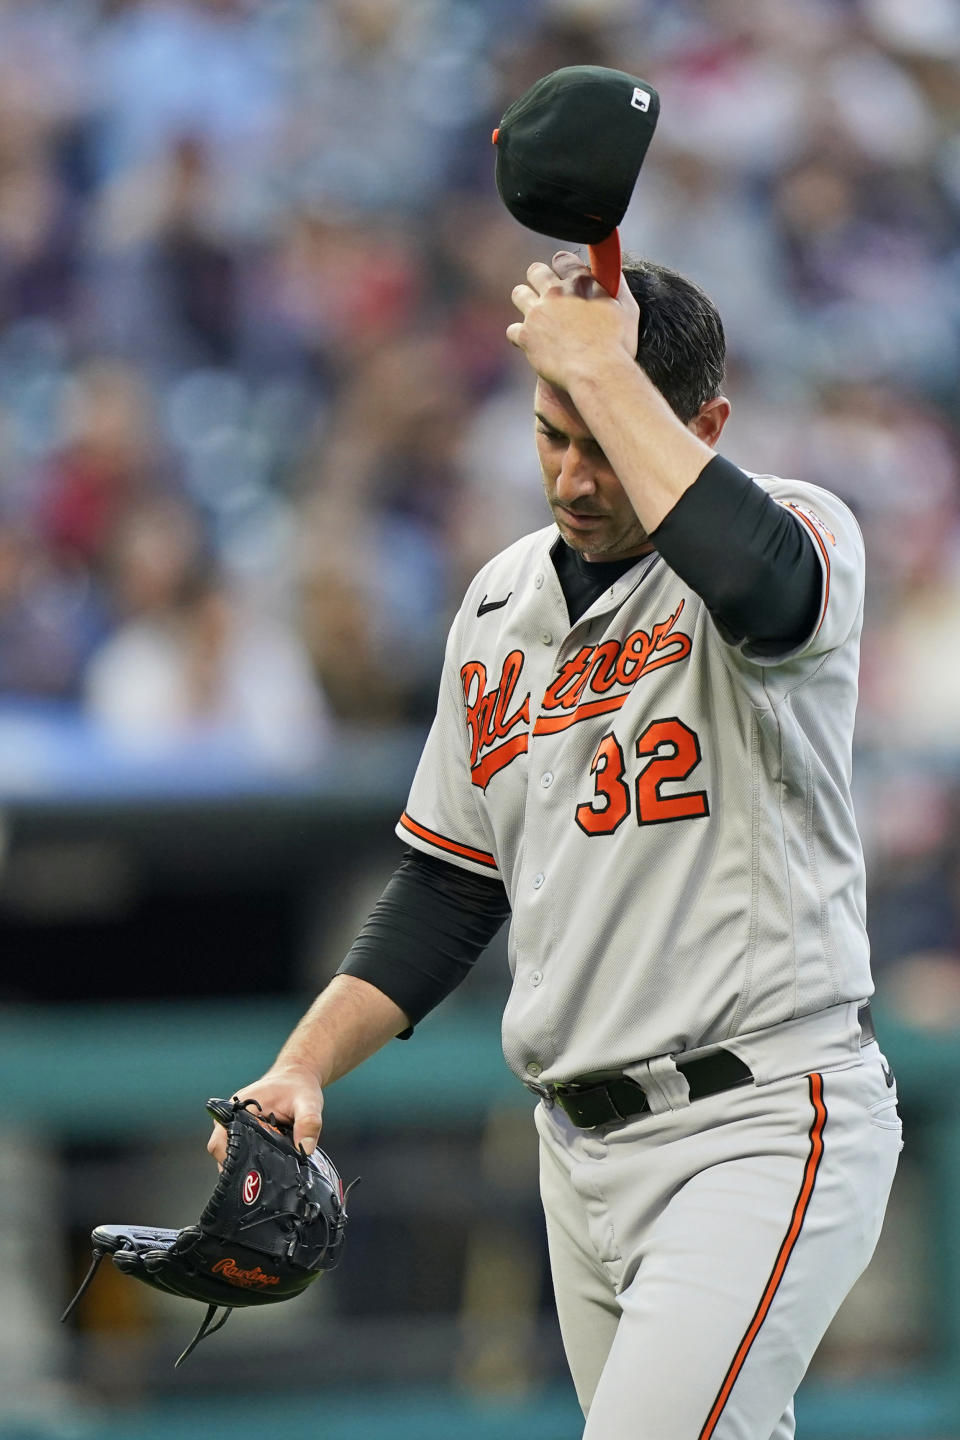 Baltimore Orioles starting pitcher Matt Harvey walks to the dugout in the fourth inning of a baseball game against the Cleveland Indians, Tuesday, June 15, 2021, in Cleveland. Harvey pitched 3 1/3 innings and gave up six hits and six runs. (AP Photo/Tony Dejak)